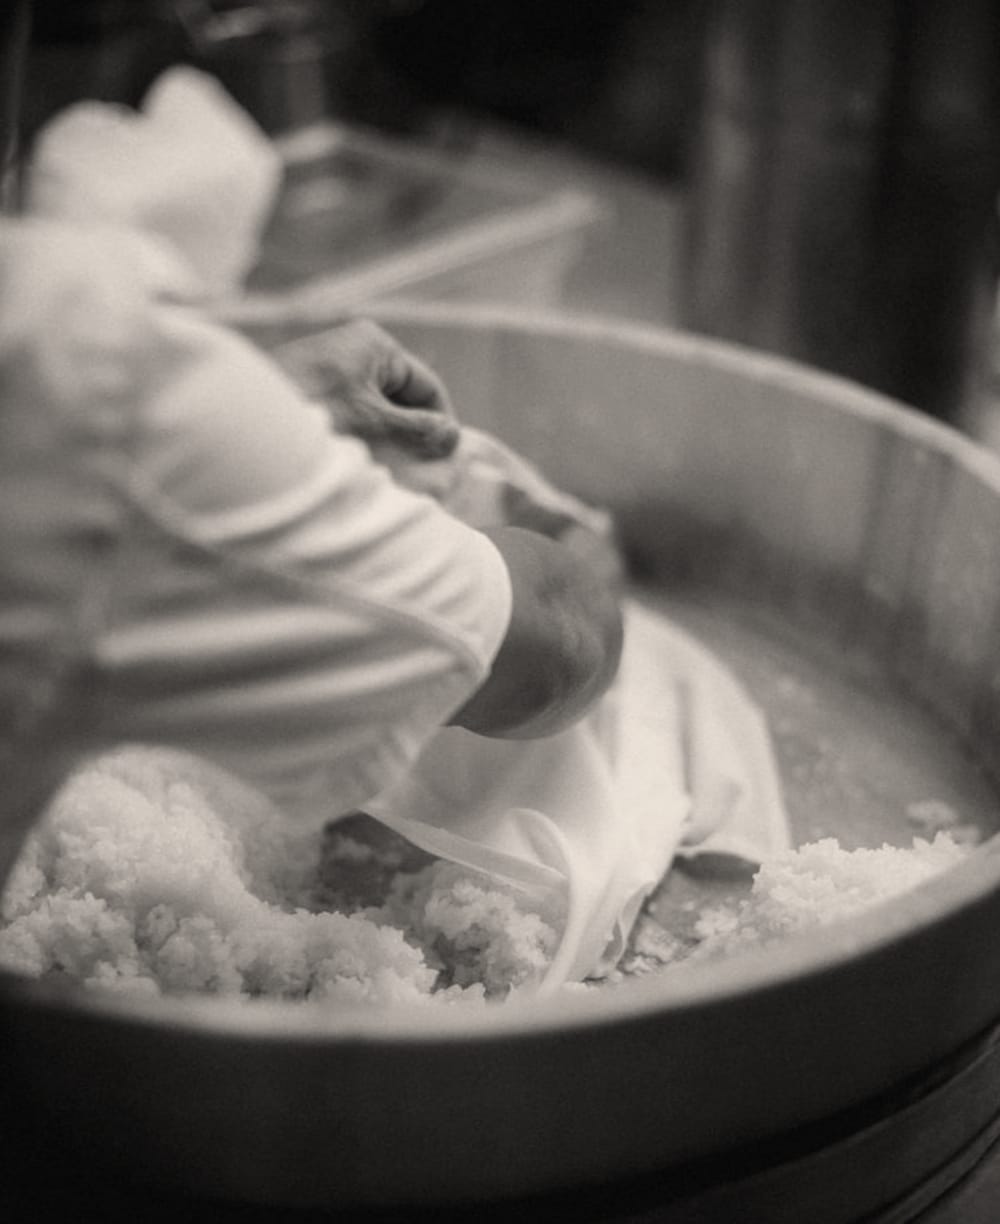 A close-up of a chef preparing rice in a large bowl.